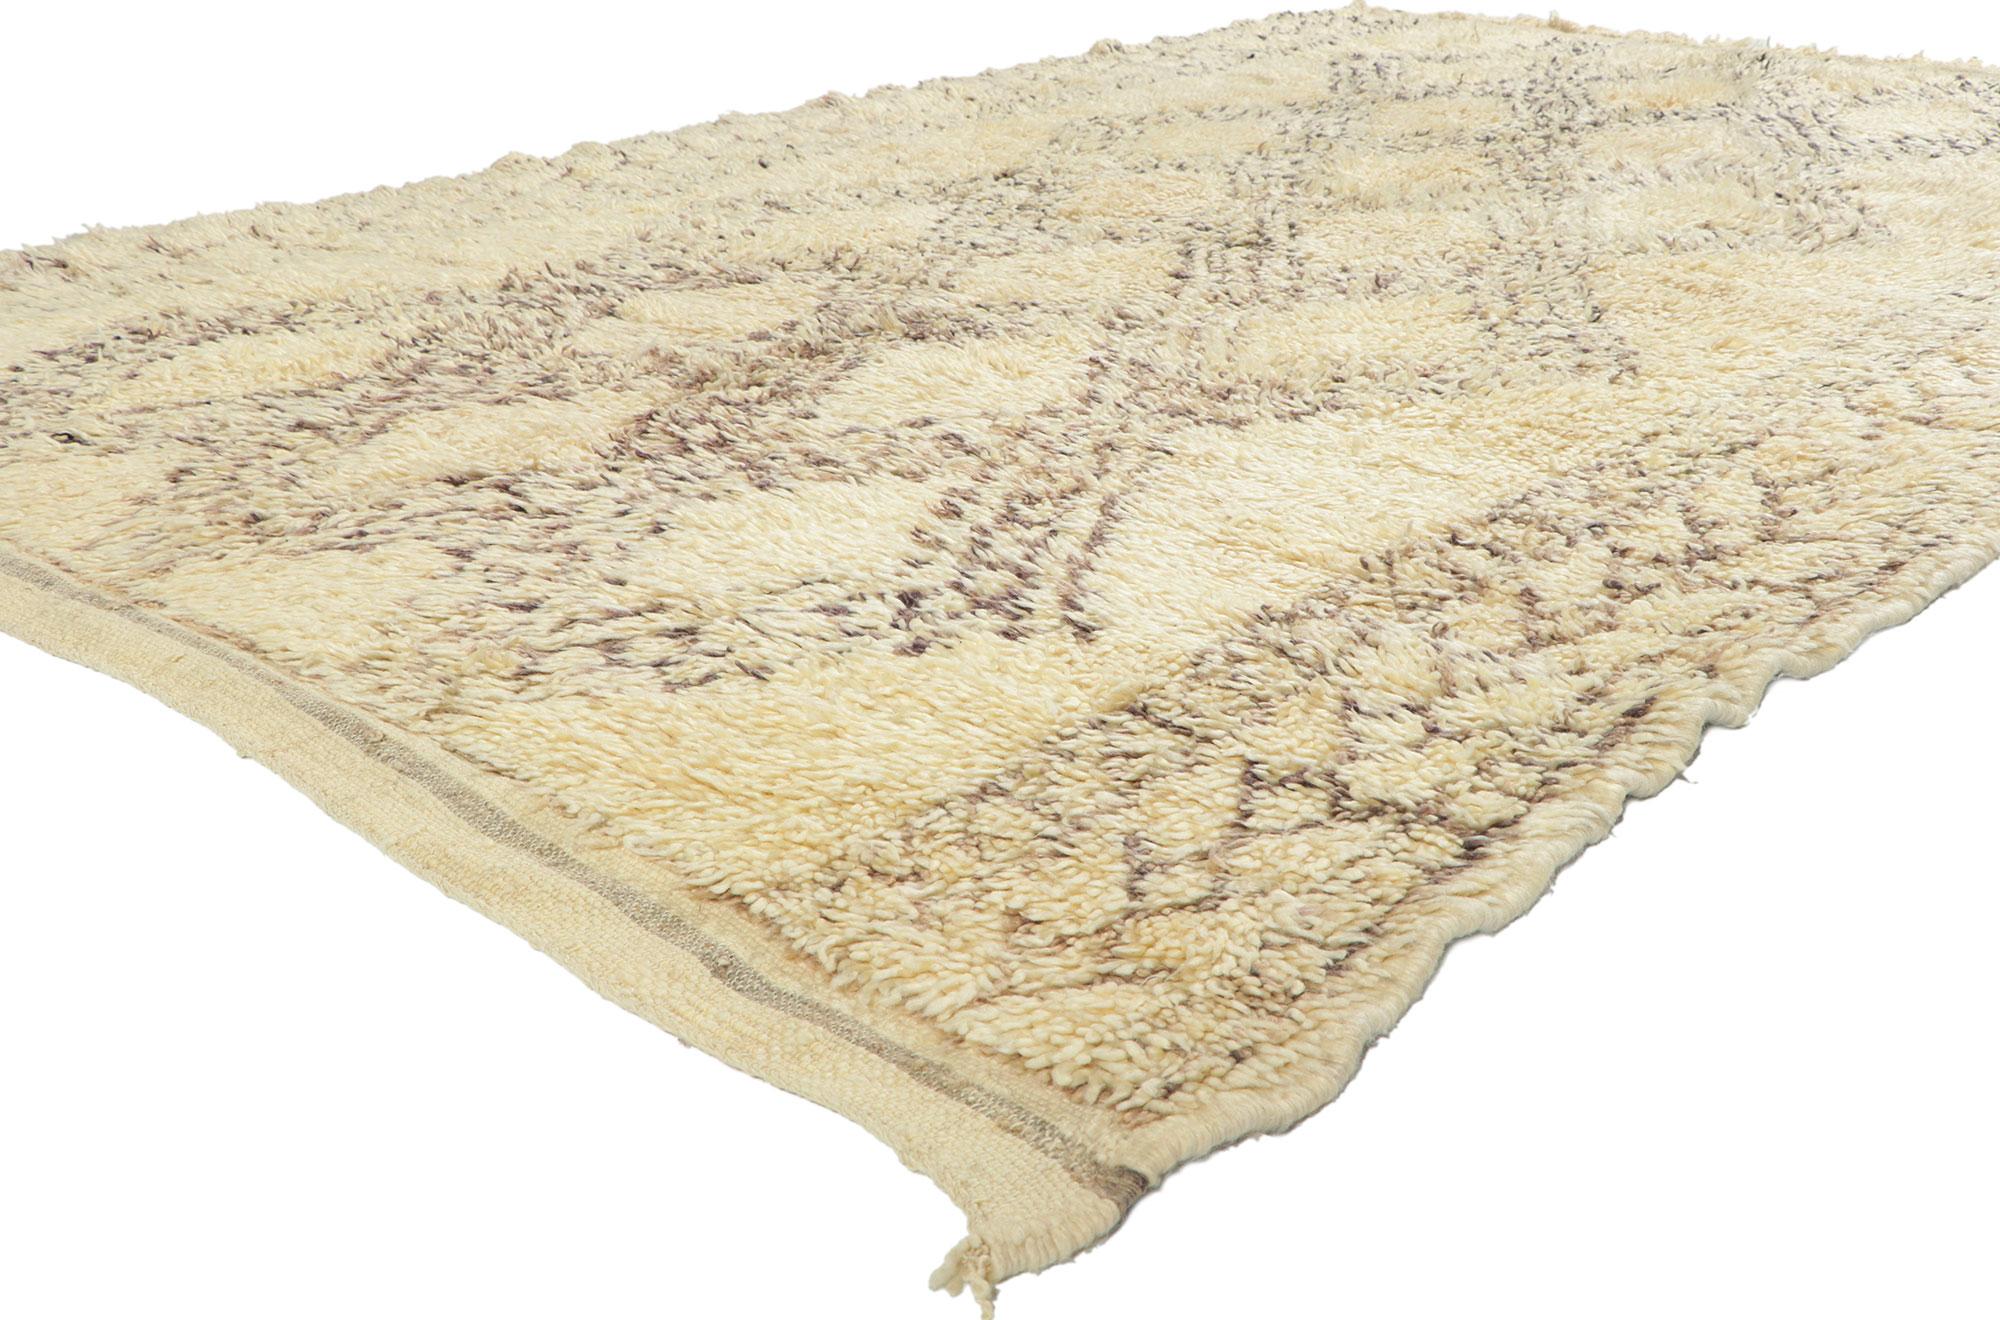 78379 Vintage Moroccan Beni Ourain Rug, 06'03 x 09'00. With its Midcentury Modern style, incredible detail and texture, this hand knotted wool vintage Beni Ourain Moroccan rug is a captivating vision of woven beauty. The eye-catching diamond trellis